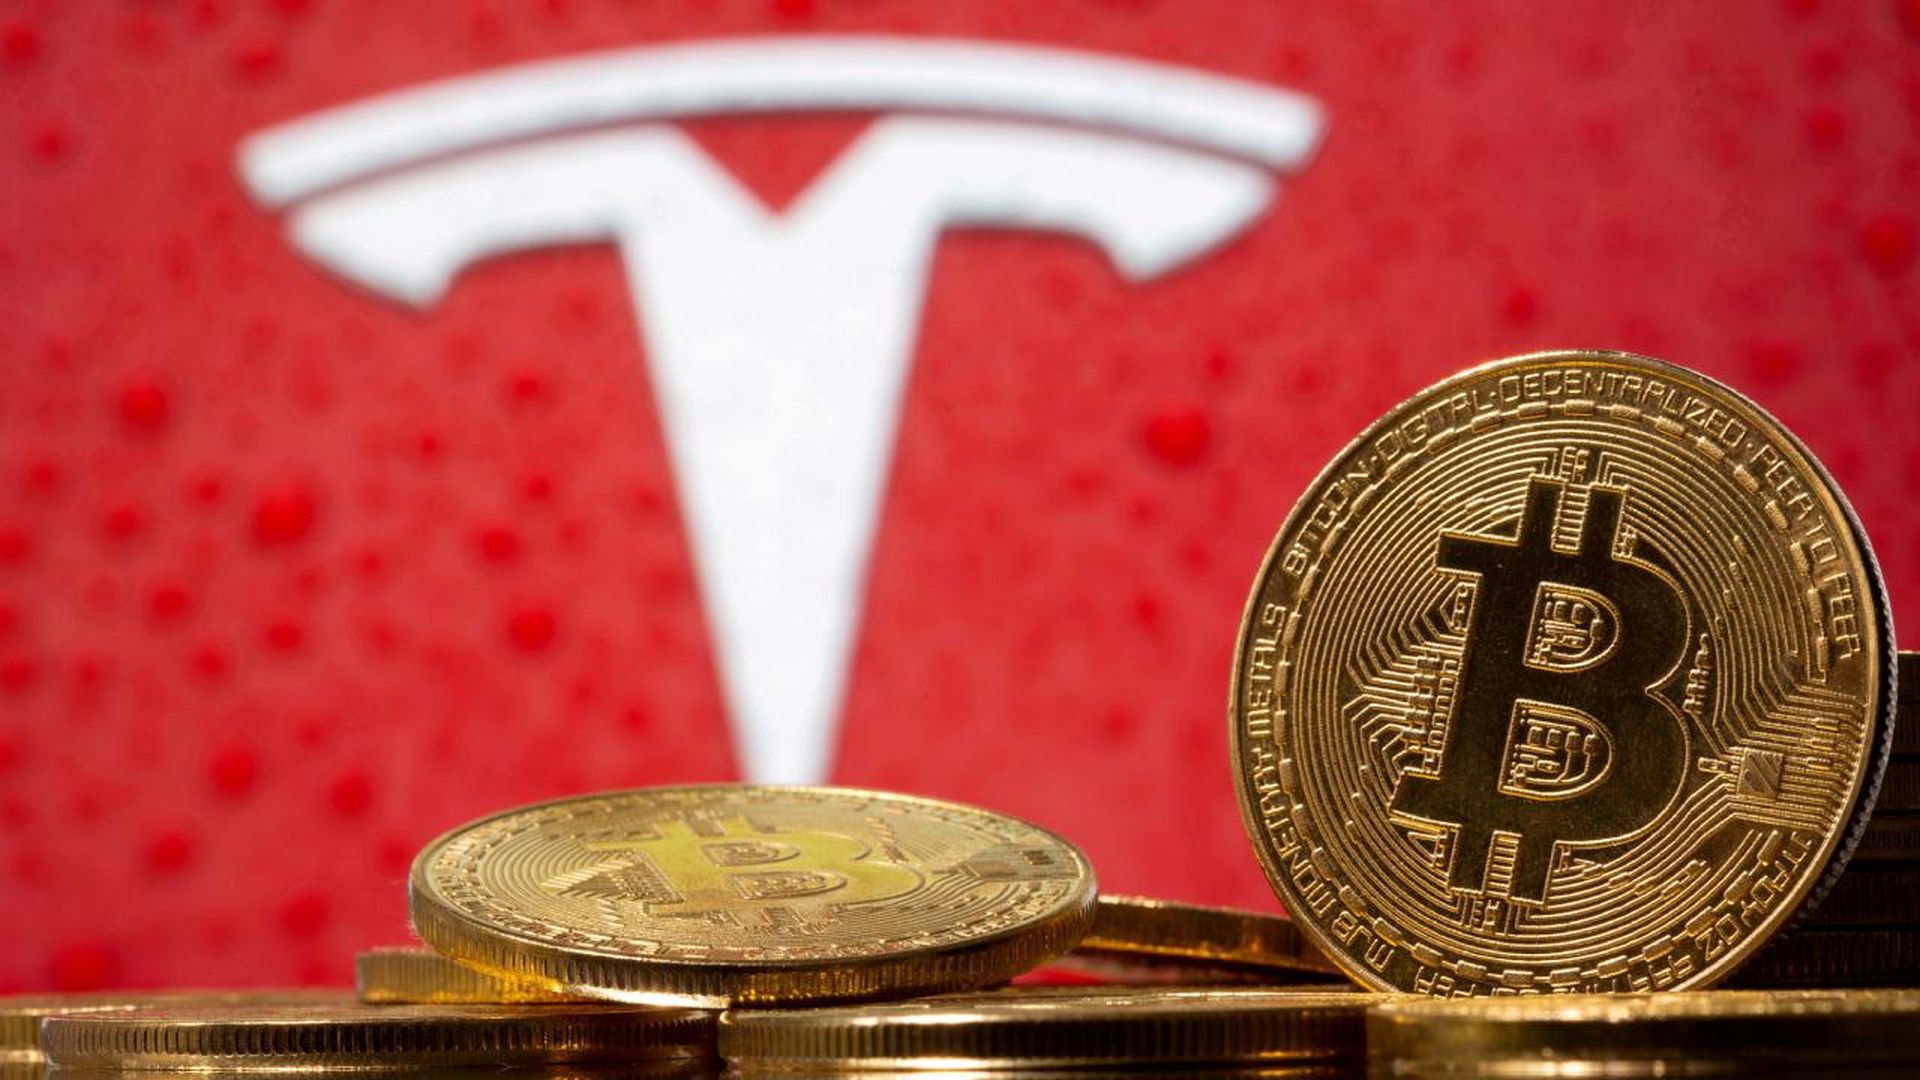 Today we've learned that Tesla sold bitcoin. Let's discuss what does this mean for the market and explain why did Tesla sell its Bitcoin holdings?